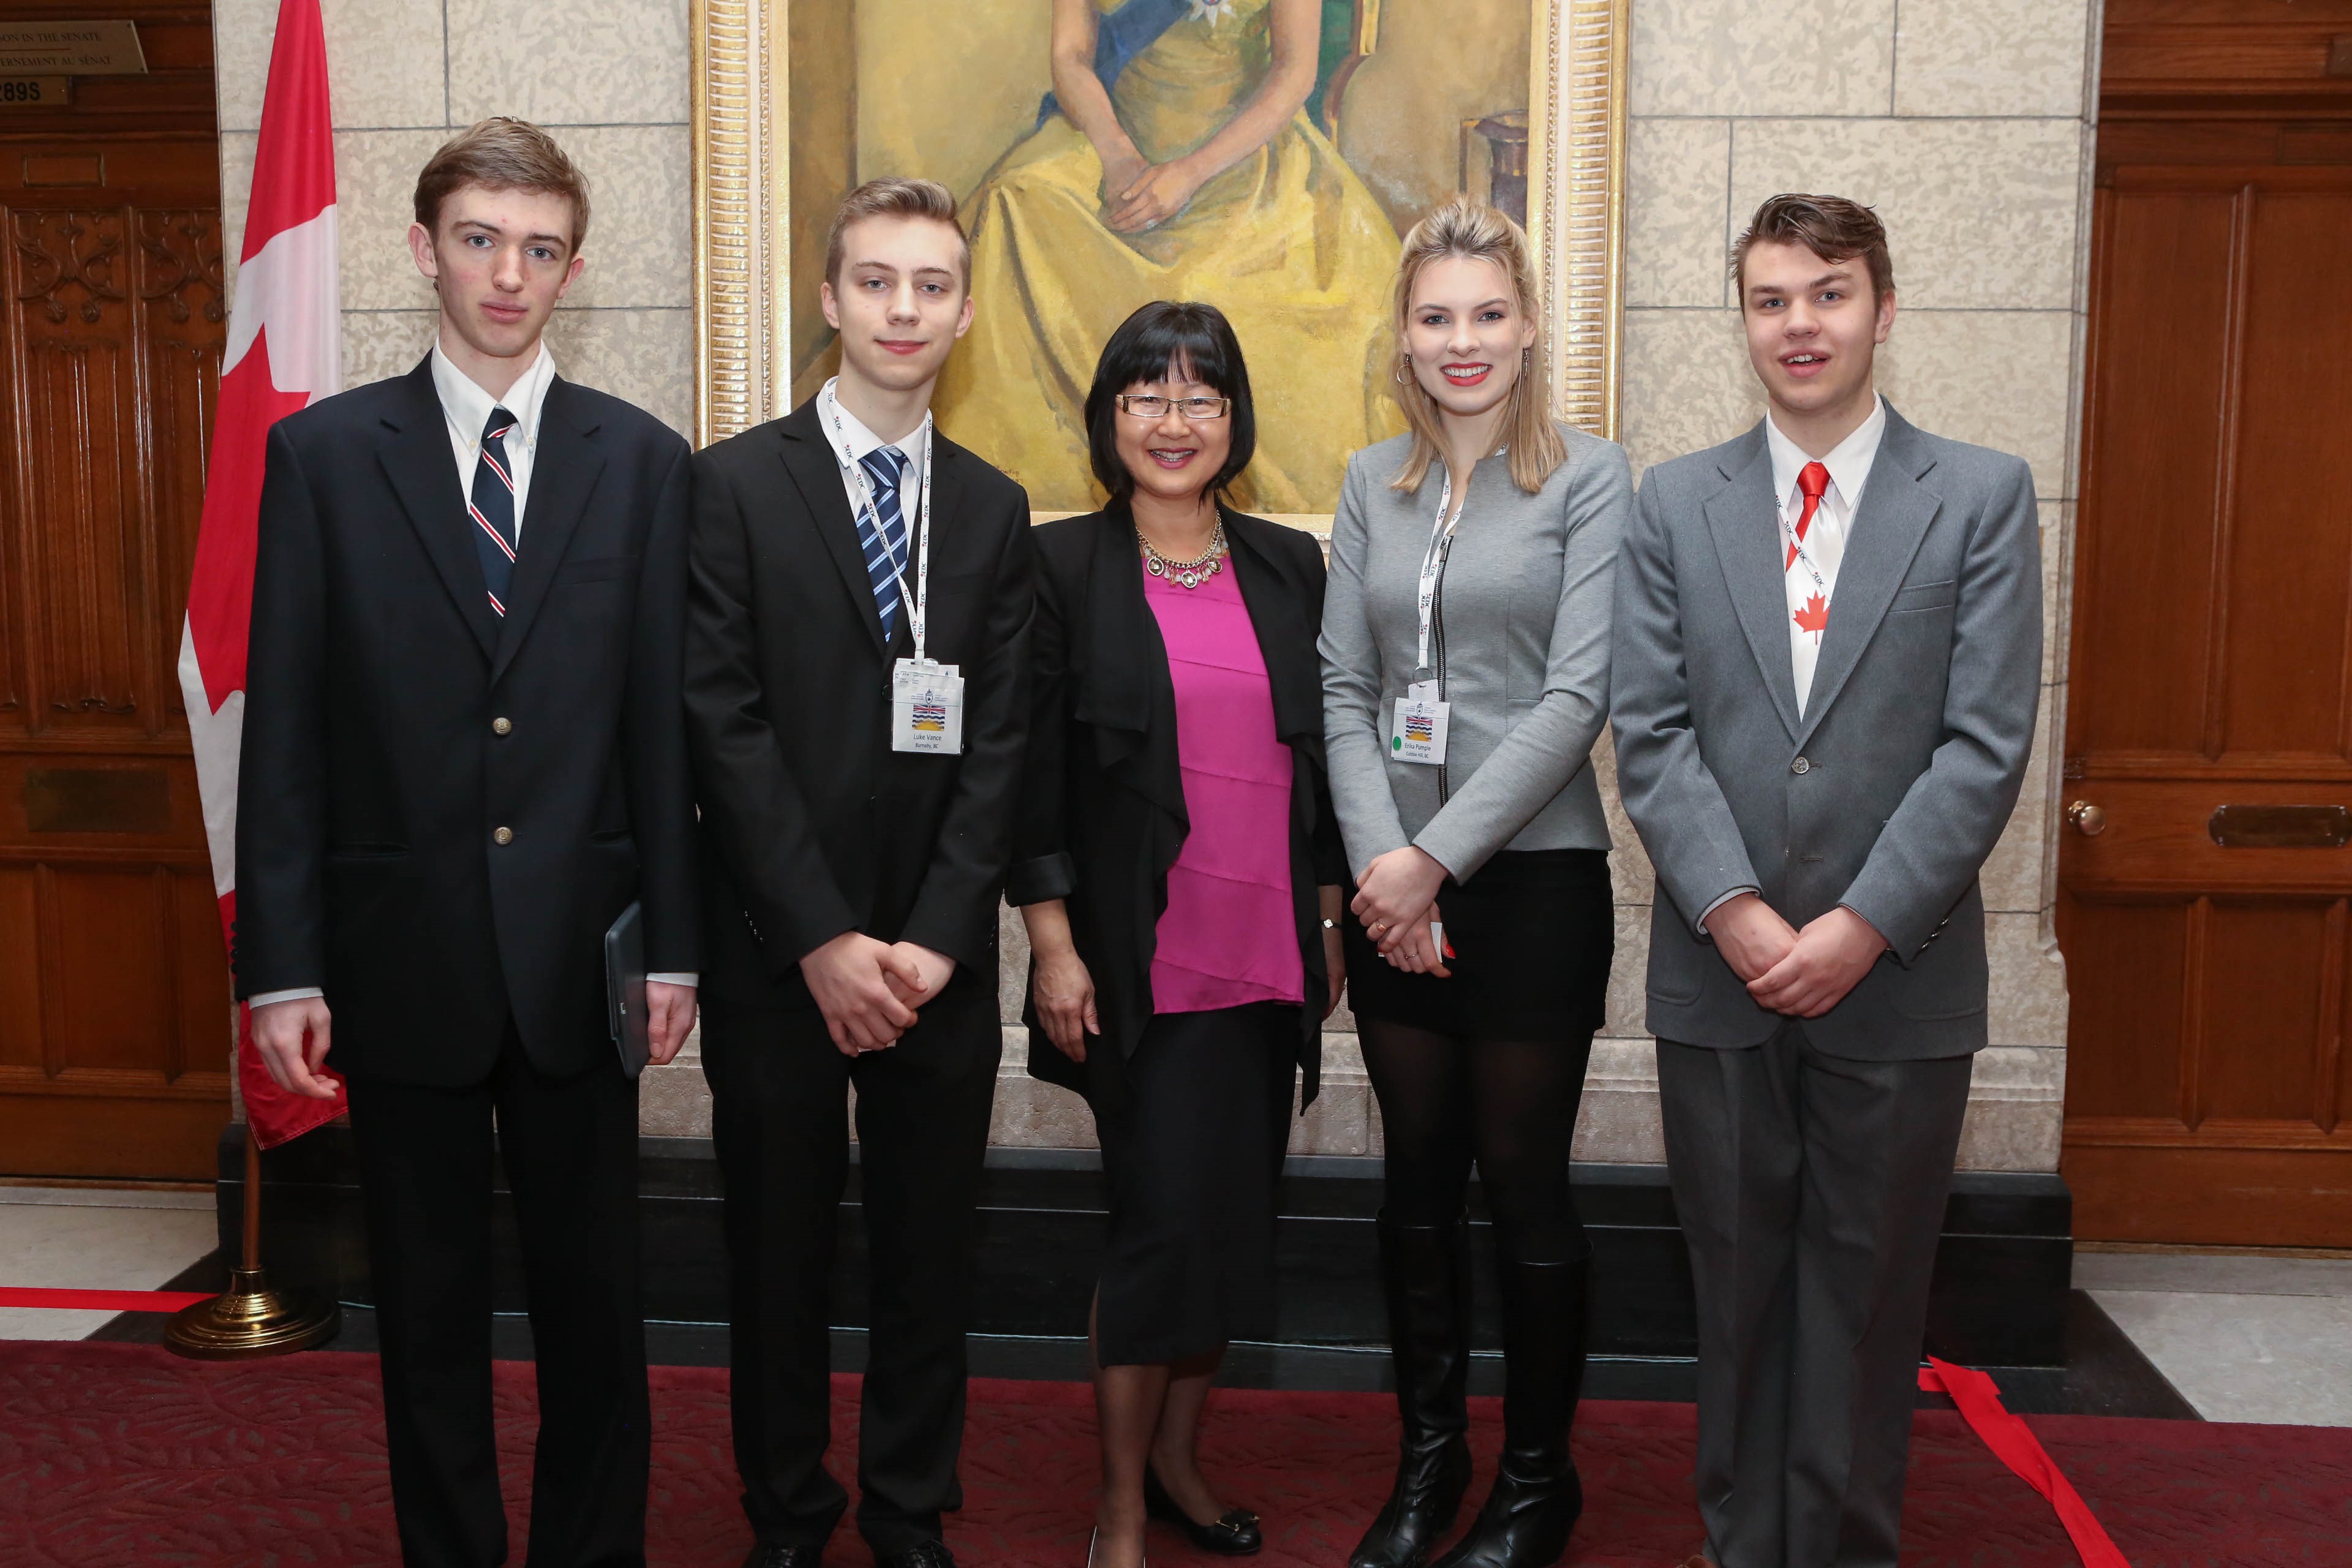 "They get to experience Parliament firsthand and are naturally transformed by their experiences," says Senator Yonah Martin. "As a former educator for 21 years, I look forward to meeting these students each and every year."